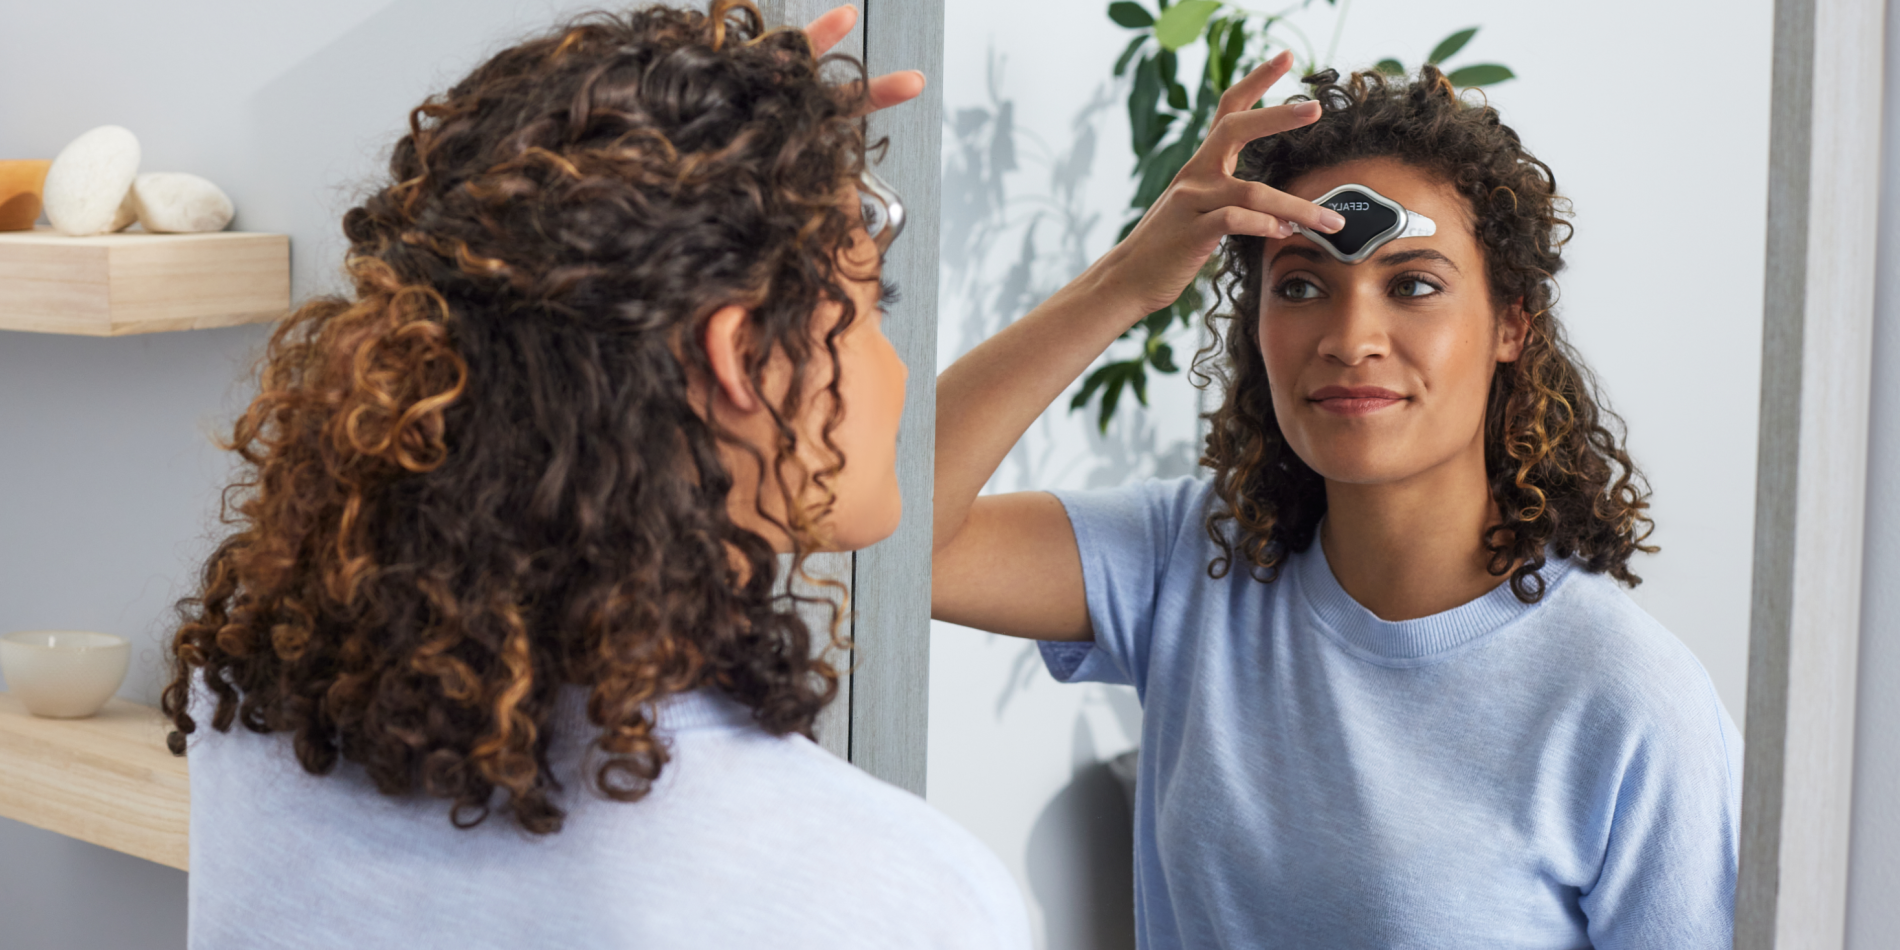 Young woman looking in mirror while holding a CEFALY device to her forehead